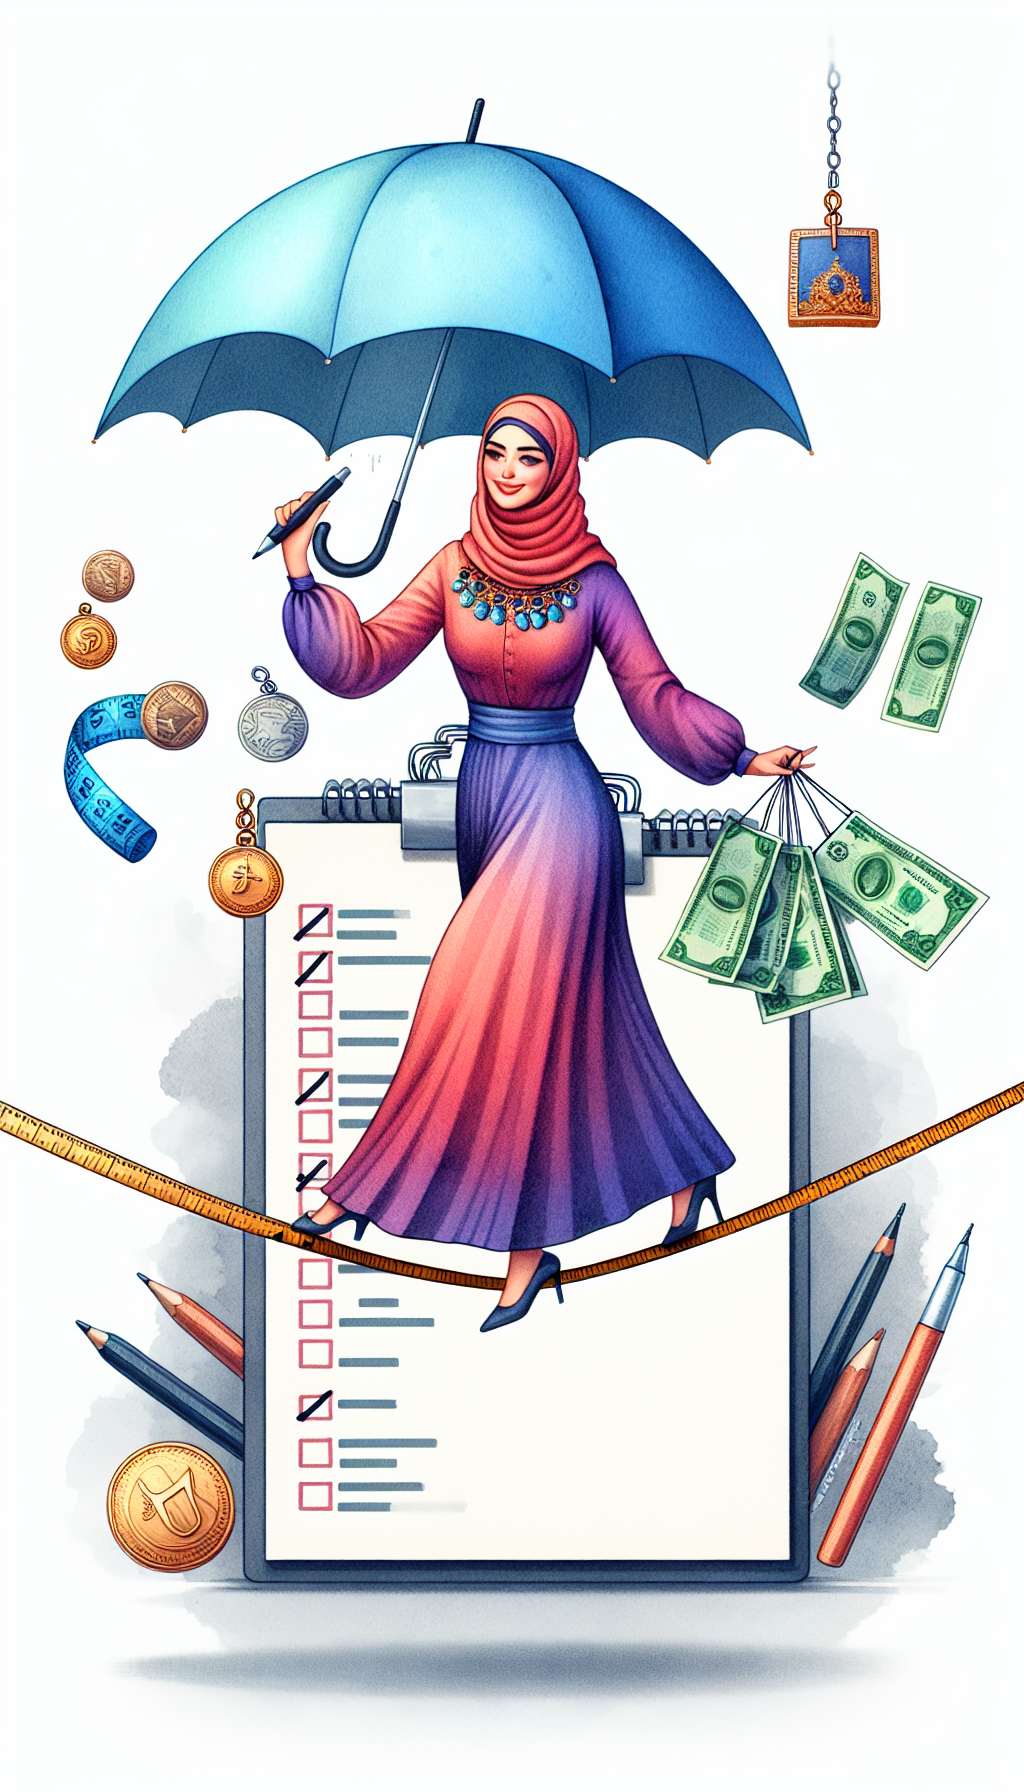 A vibrant watercolor-style illustration showing a person balancing on a tightrope made of a measuring tape, which symbolizes appraisal. They hold an umbrella with currency notes flying off, while art pieces hang like charms on a bracelet from their wrist. A checklist hovers in the background with tick marks, visualizing preparation and cost management for art appraisal.